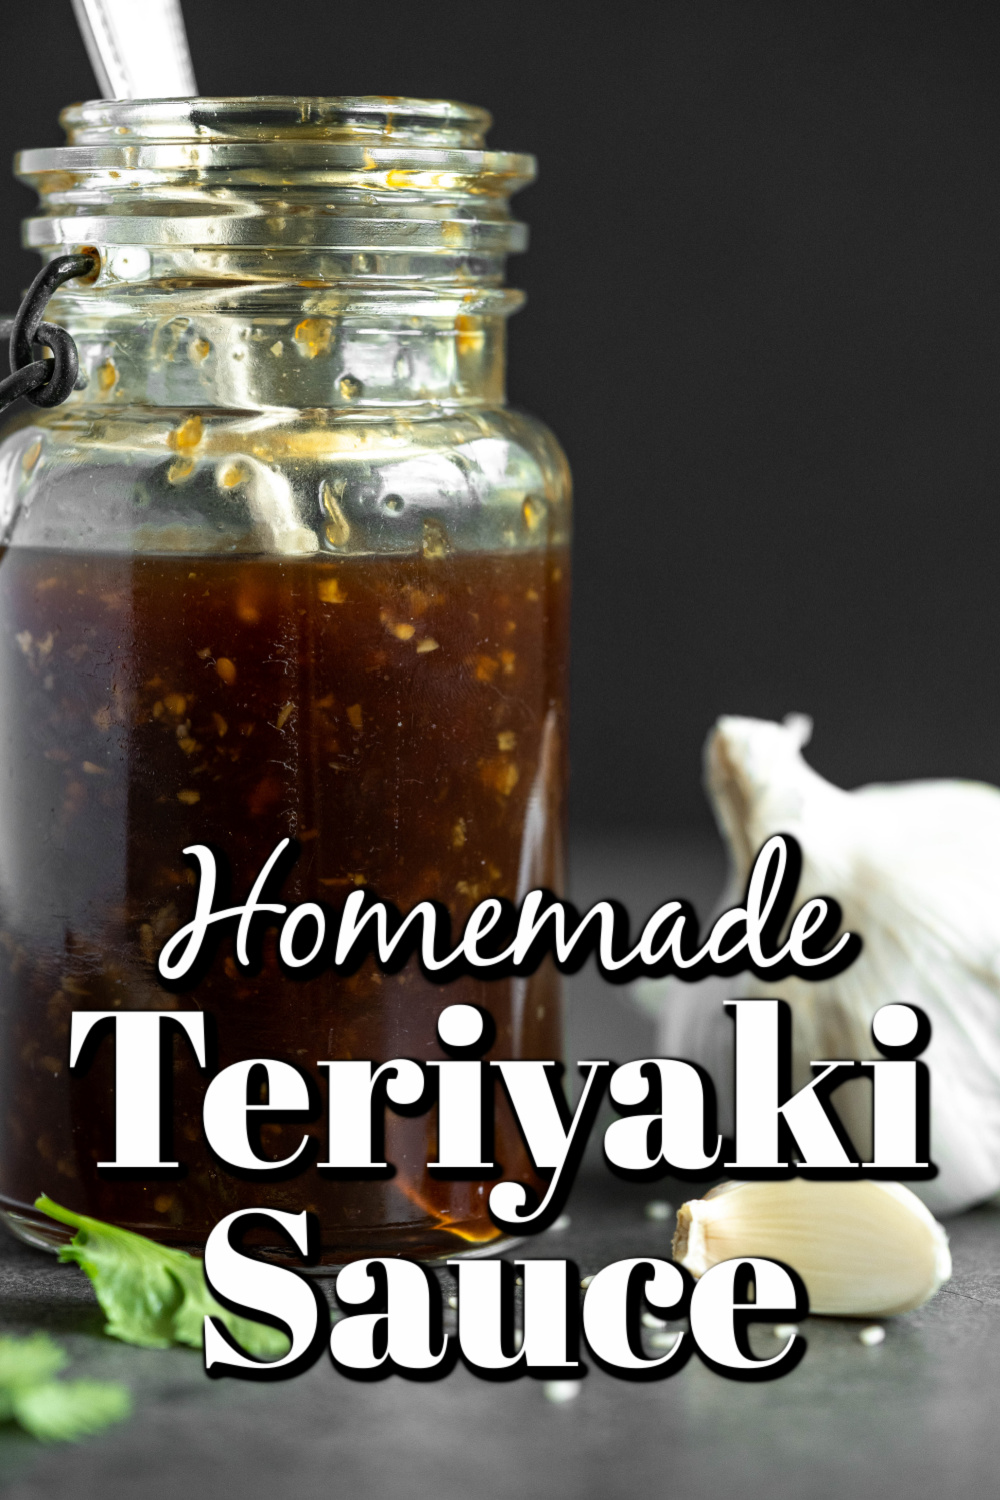 This homemade teriyaki sauce is easy to prepare and the taste is simply amazing!